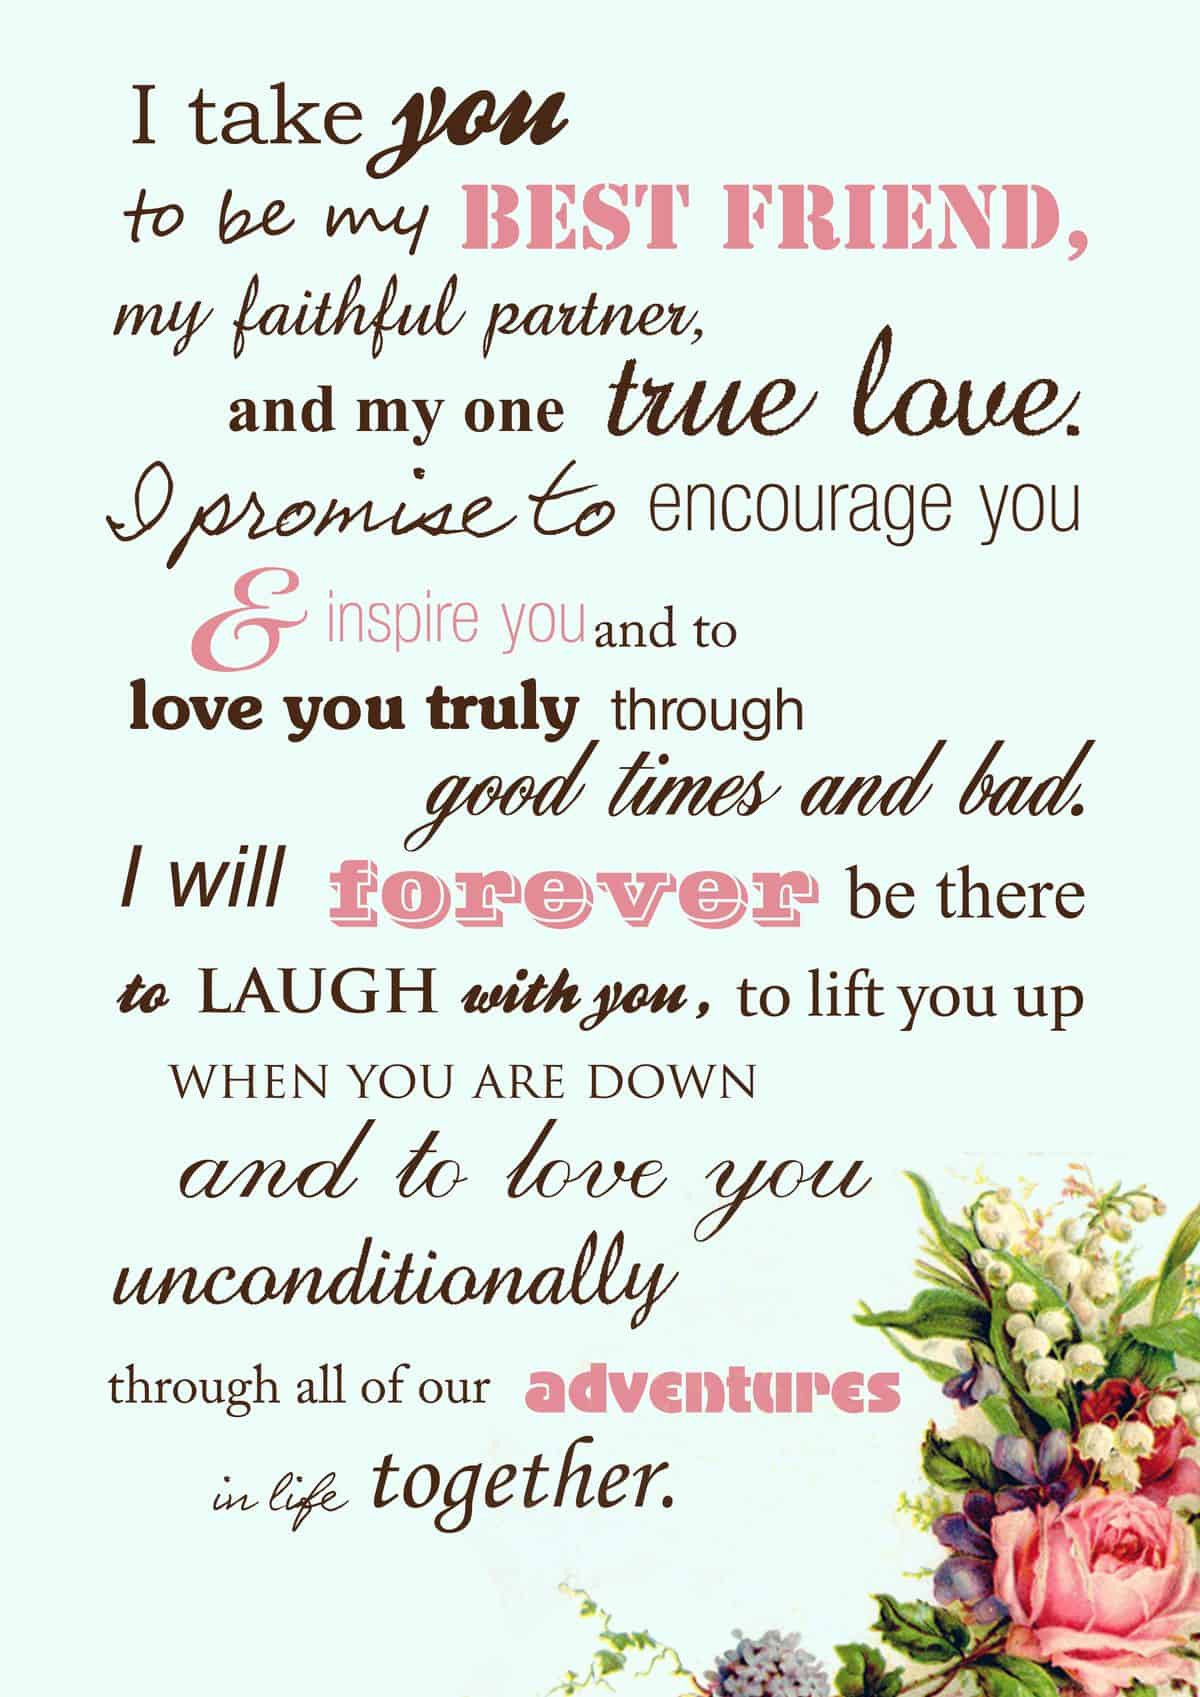 Wedding Vows Examples
 traditional wedding vows best photos Cute Wedding Ideas